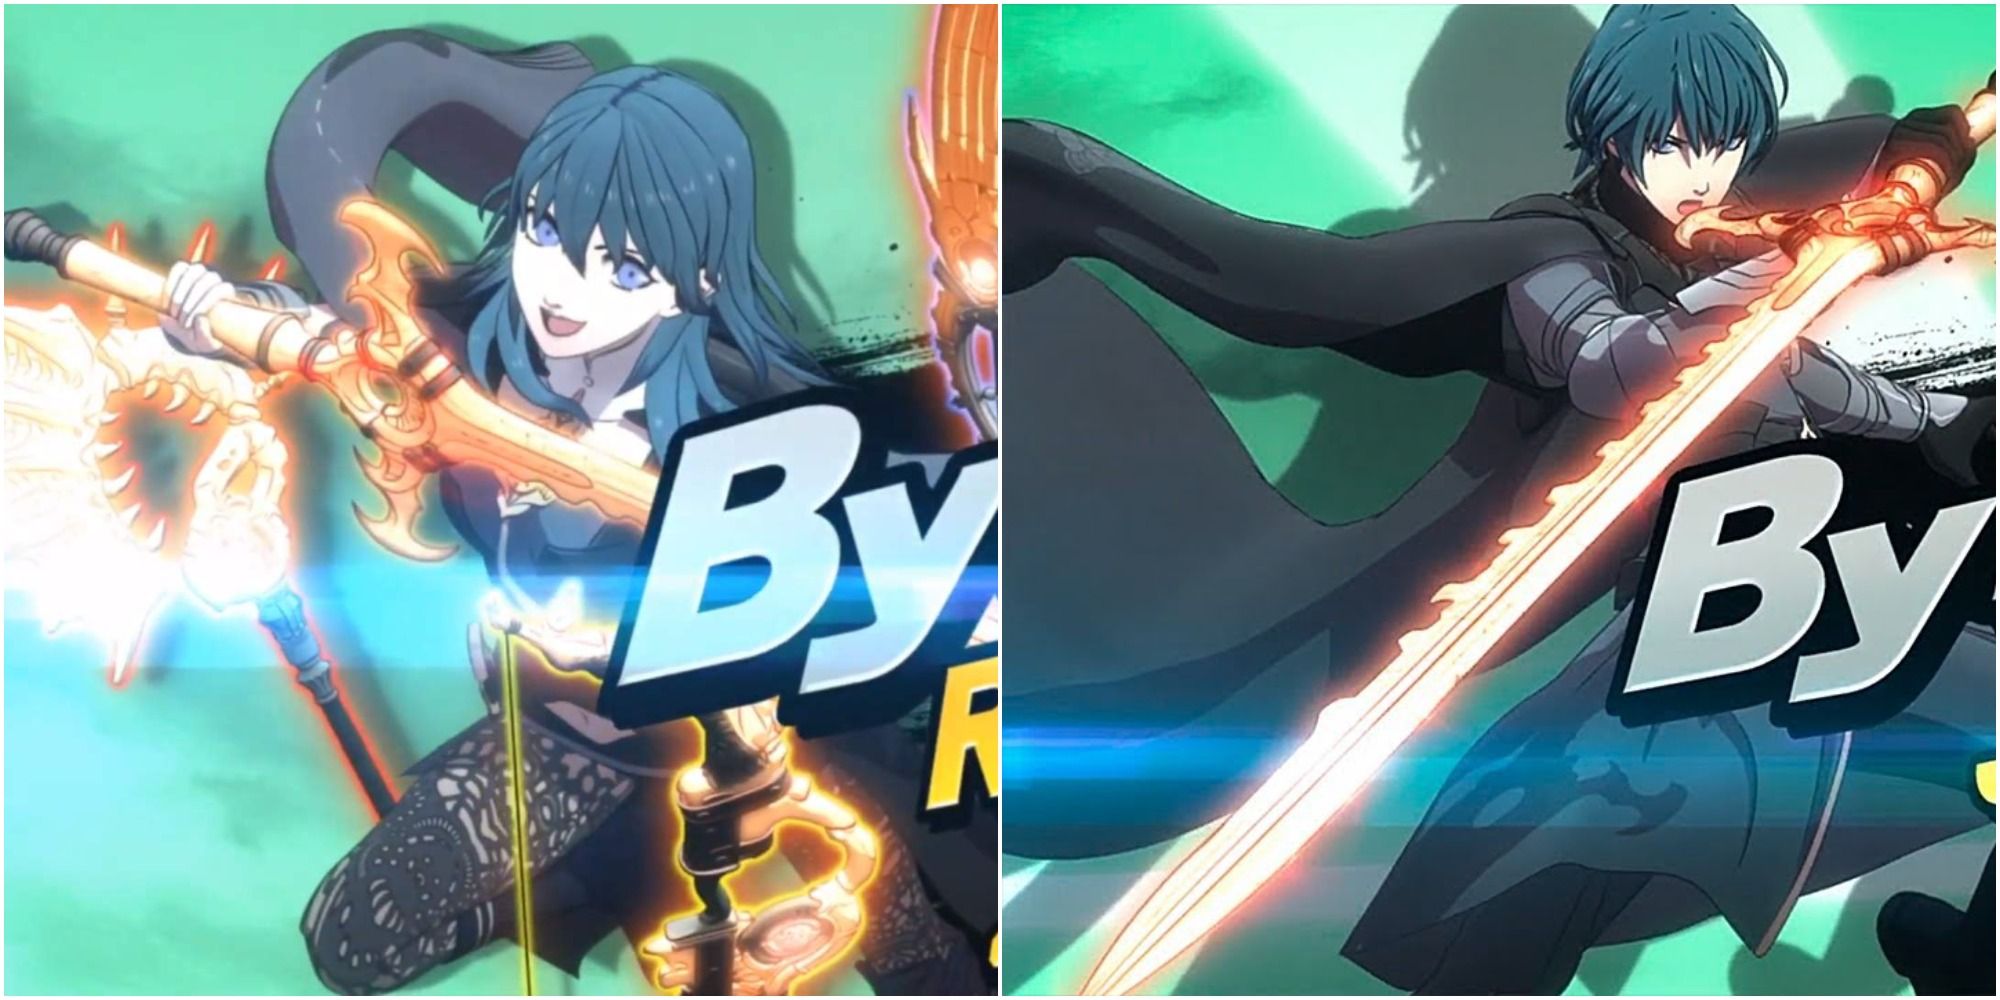 Female and Male Byleth from Fire Emblem: Three Houses As Guest DLC Characters in Super Smash Bros. Ultimate